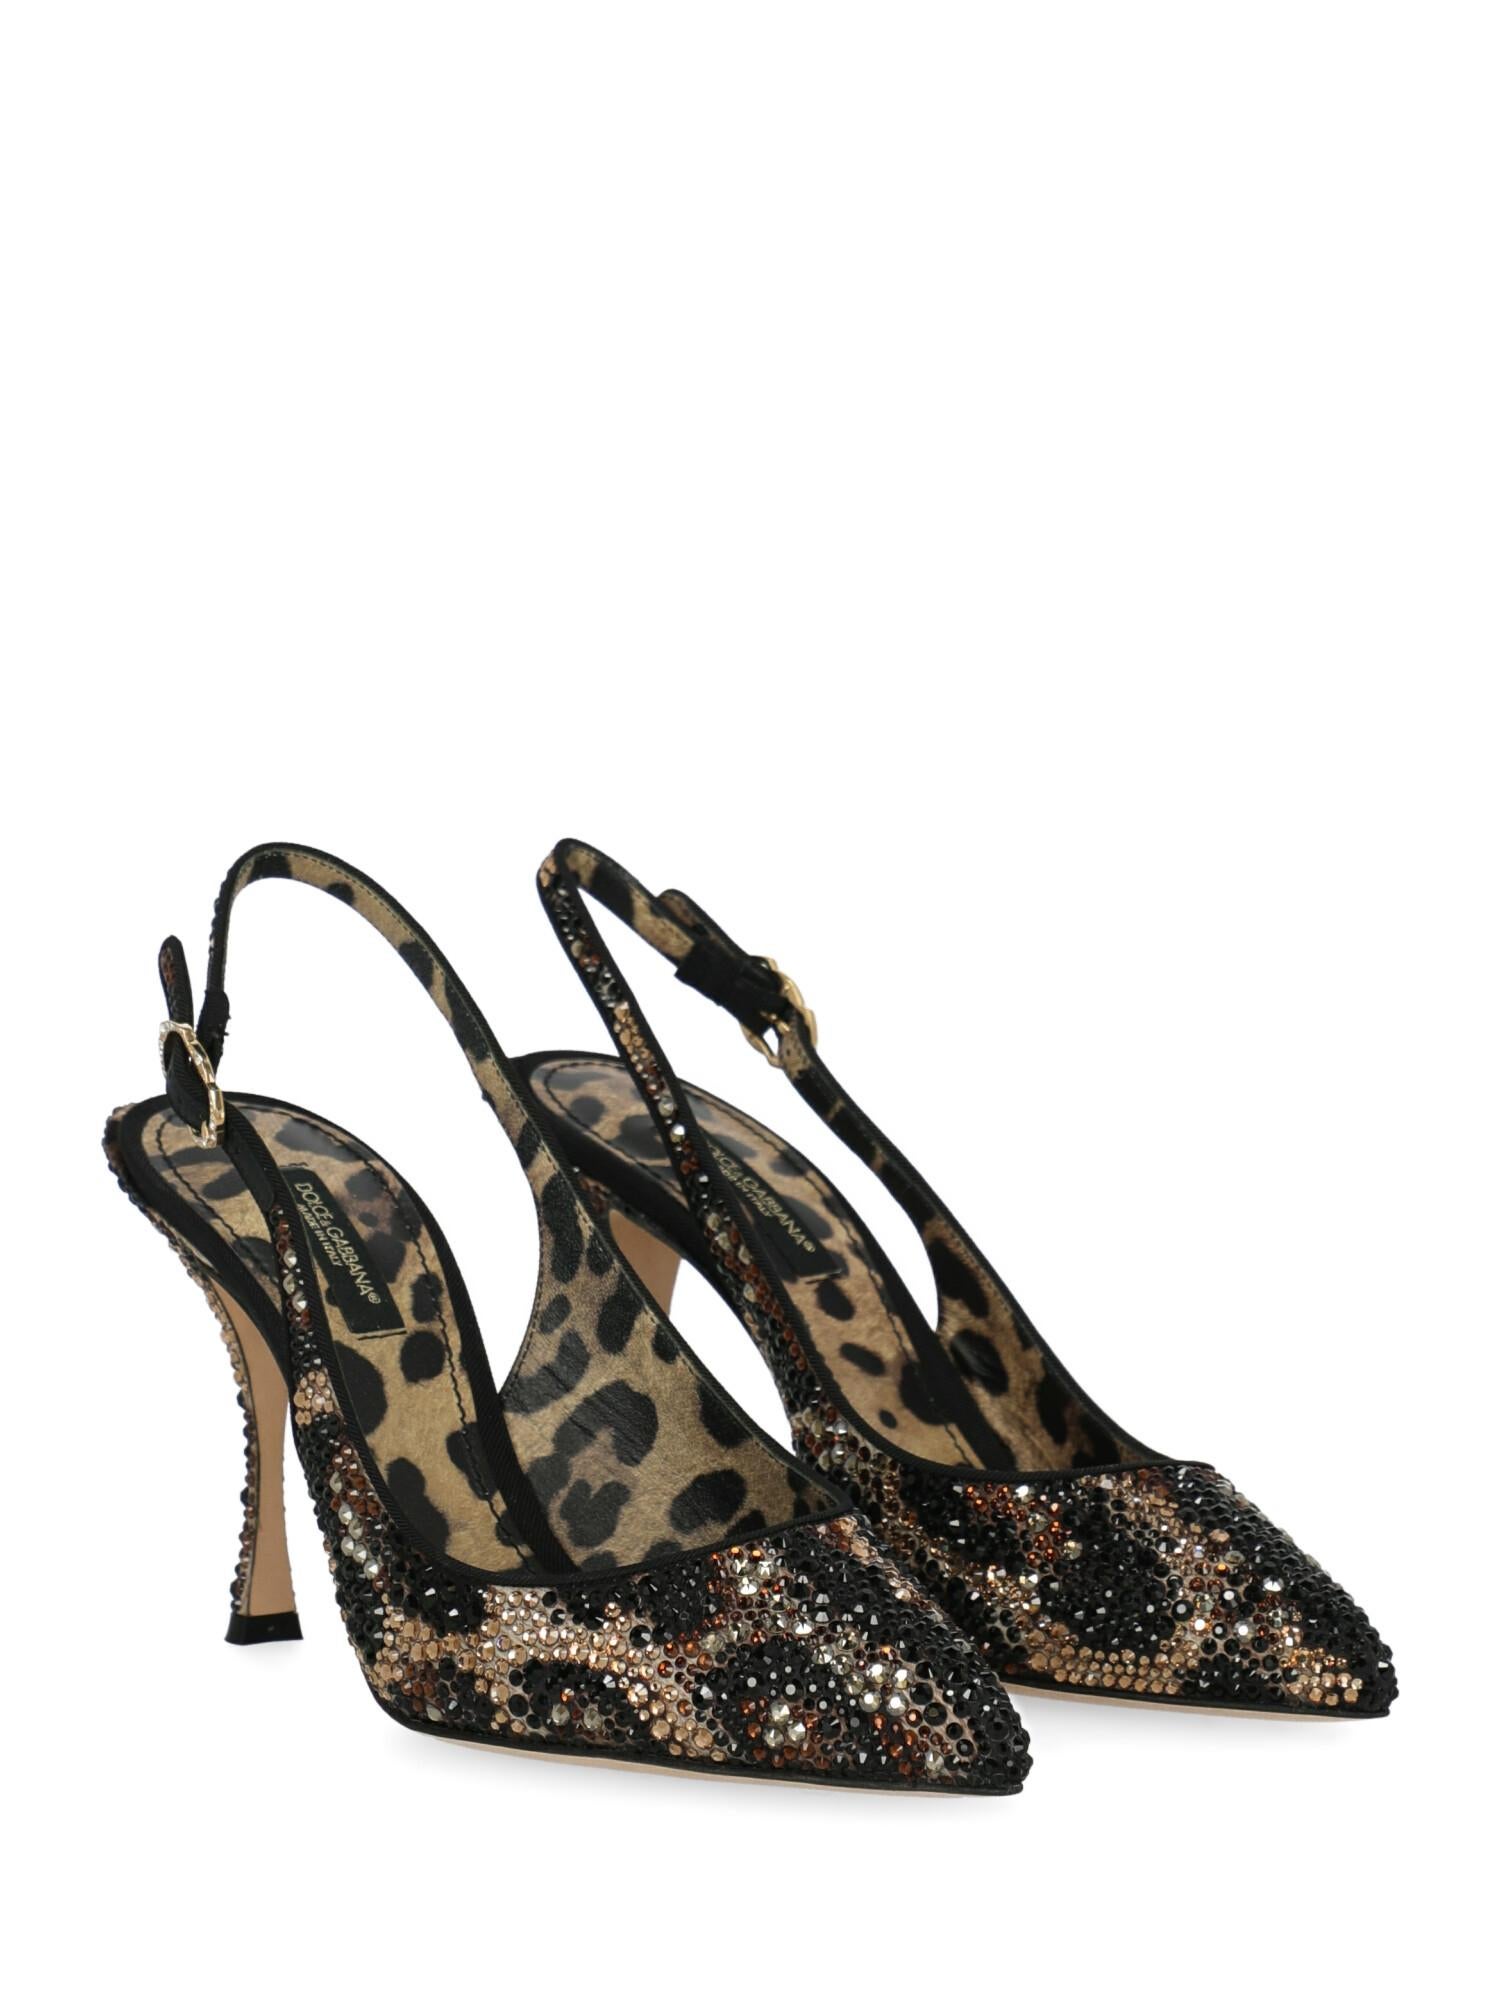 Woman, fabric, animal print, buckle fastening, ligth gold-tone hardware, pointed toe, branded insole, tapered heel, high heel

Includes:
- Dust bag
- Box

Product Condition: Excellent

Measurements:
Height: 10 cm

Composition:
Upper: 100%